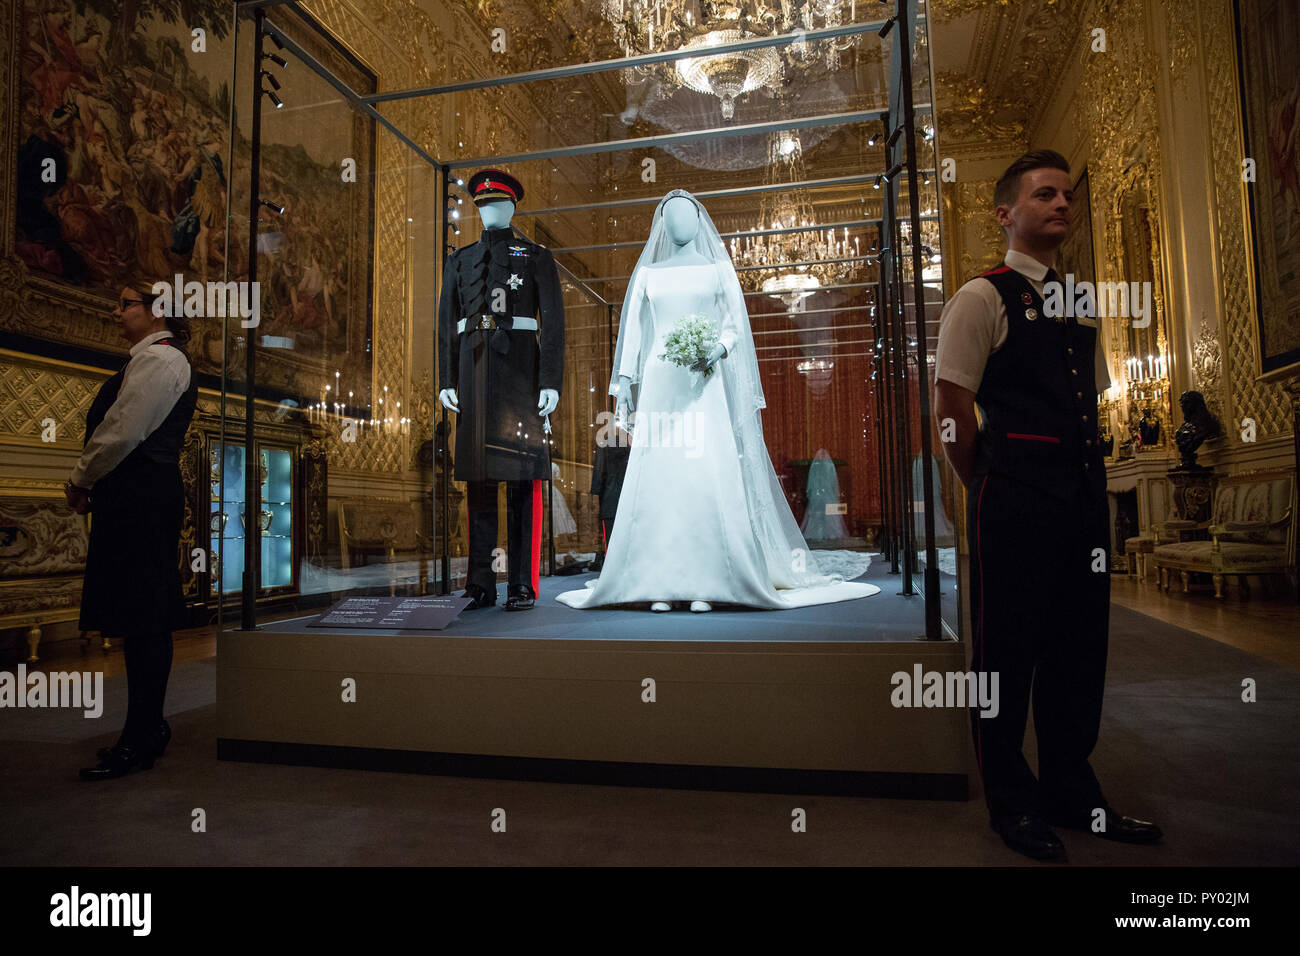 Windsor, UK. 25th October, 2018. IMAGE EMBARGOED FOR PUBLICATION UNTIL 00:01 BST, FRIDAY, 26 OCTOBER. Windsor Castle staff members pose next to the Duchess of Sussex’s wedding dress, created by the British designer Clare Waight Keller, Artistic Director at the historic French fashion house Givenchy, and the Duke of Sussex's frockcoat uniform of the Household Cavalry, which will go on display from 26th October 2018 to 6th January 2019 as part of a special exhibition entitled 'A Royal Wedding: The Duke and Duchess of Sussex'. Credit: Mark Kerrison/Alamy Live News Stock Photo